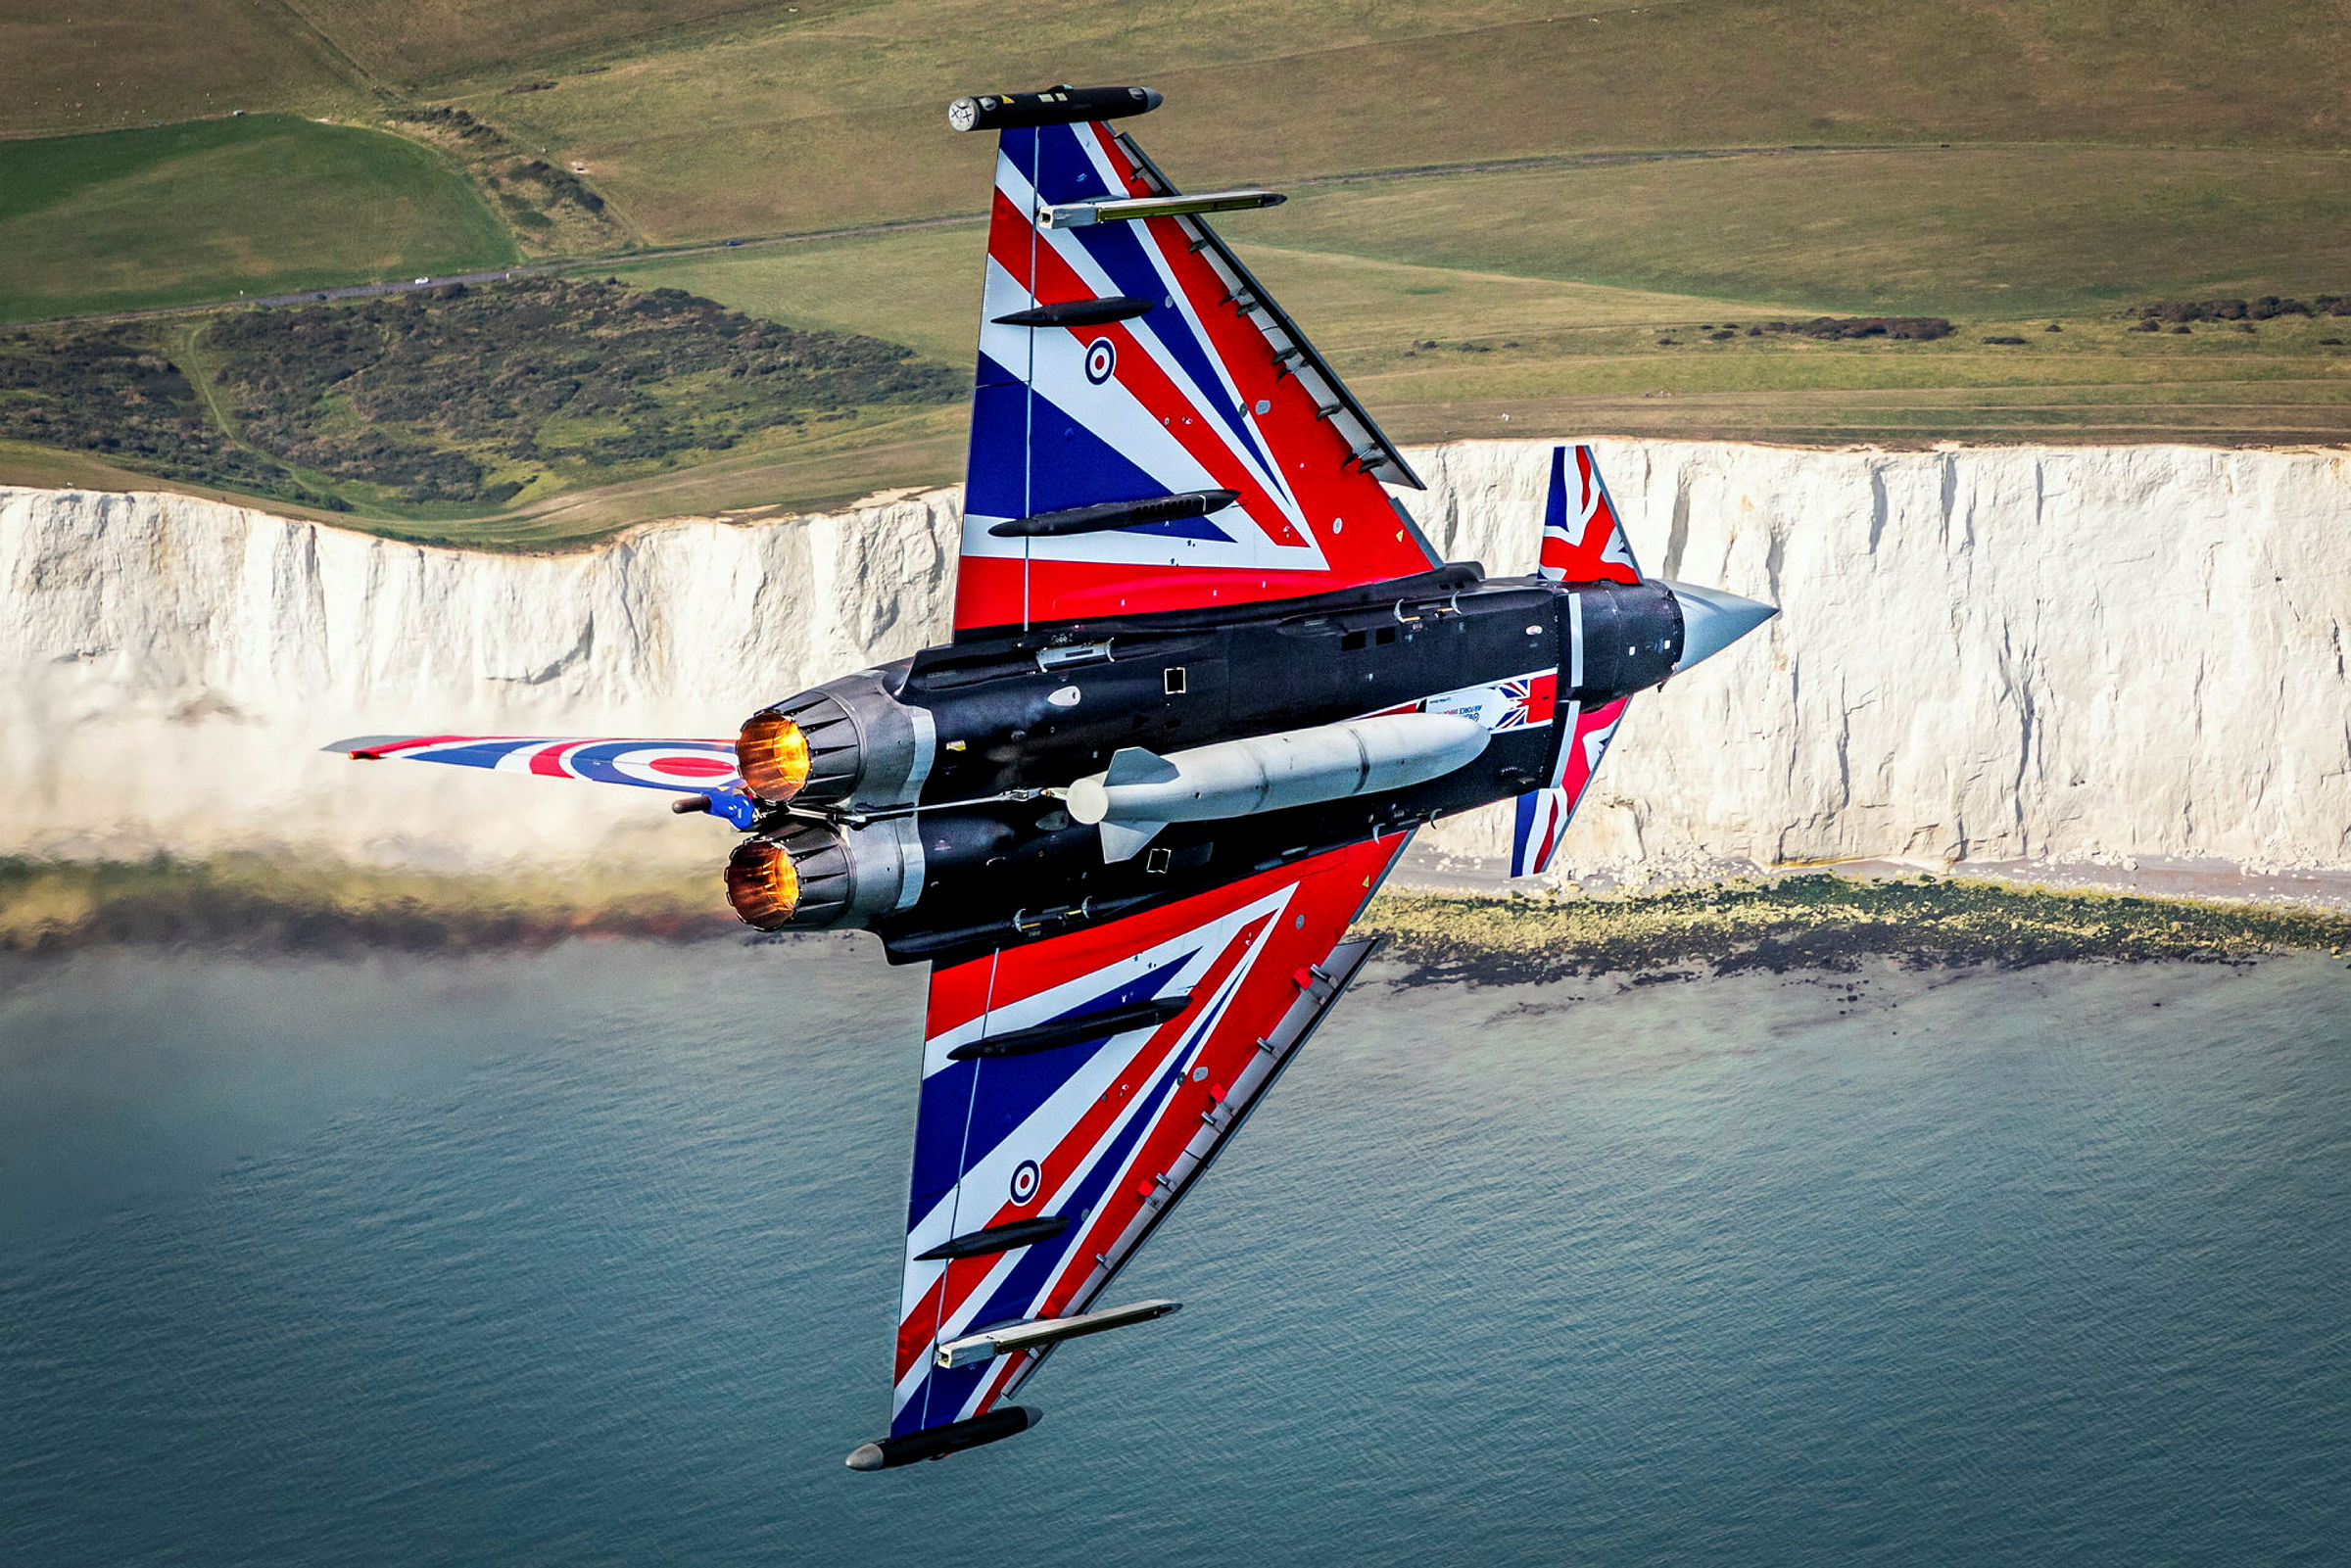 Typhoon with Union Jack paintwork flying over dover cliffs.